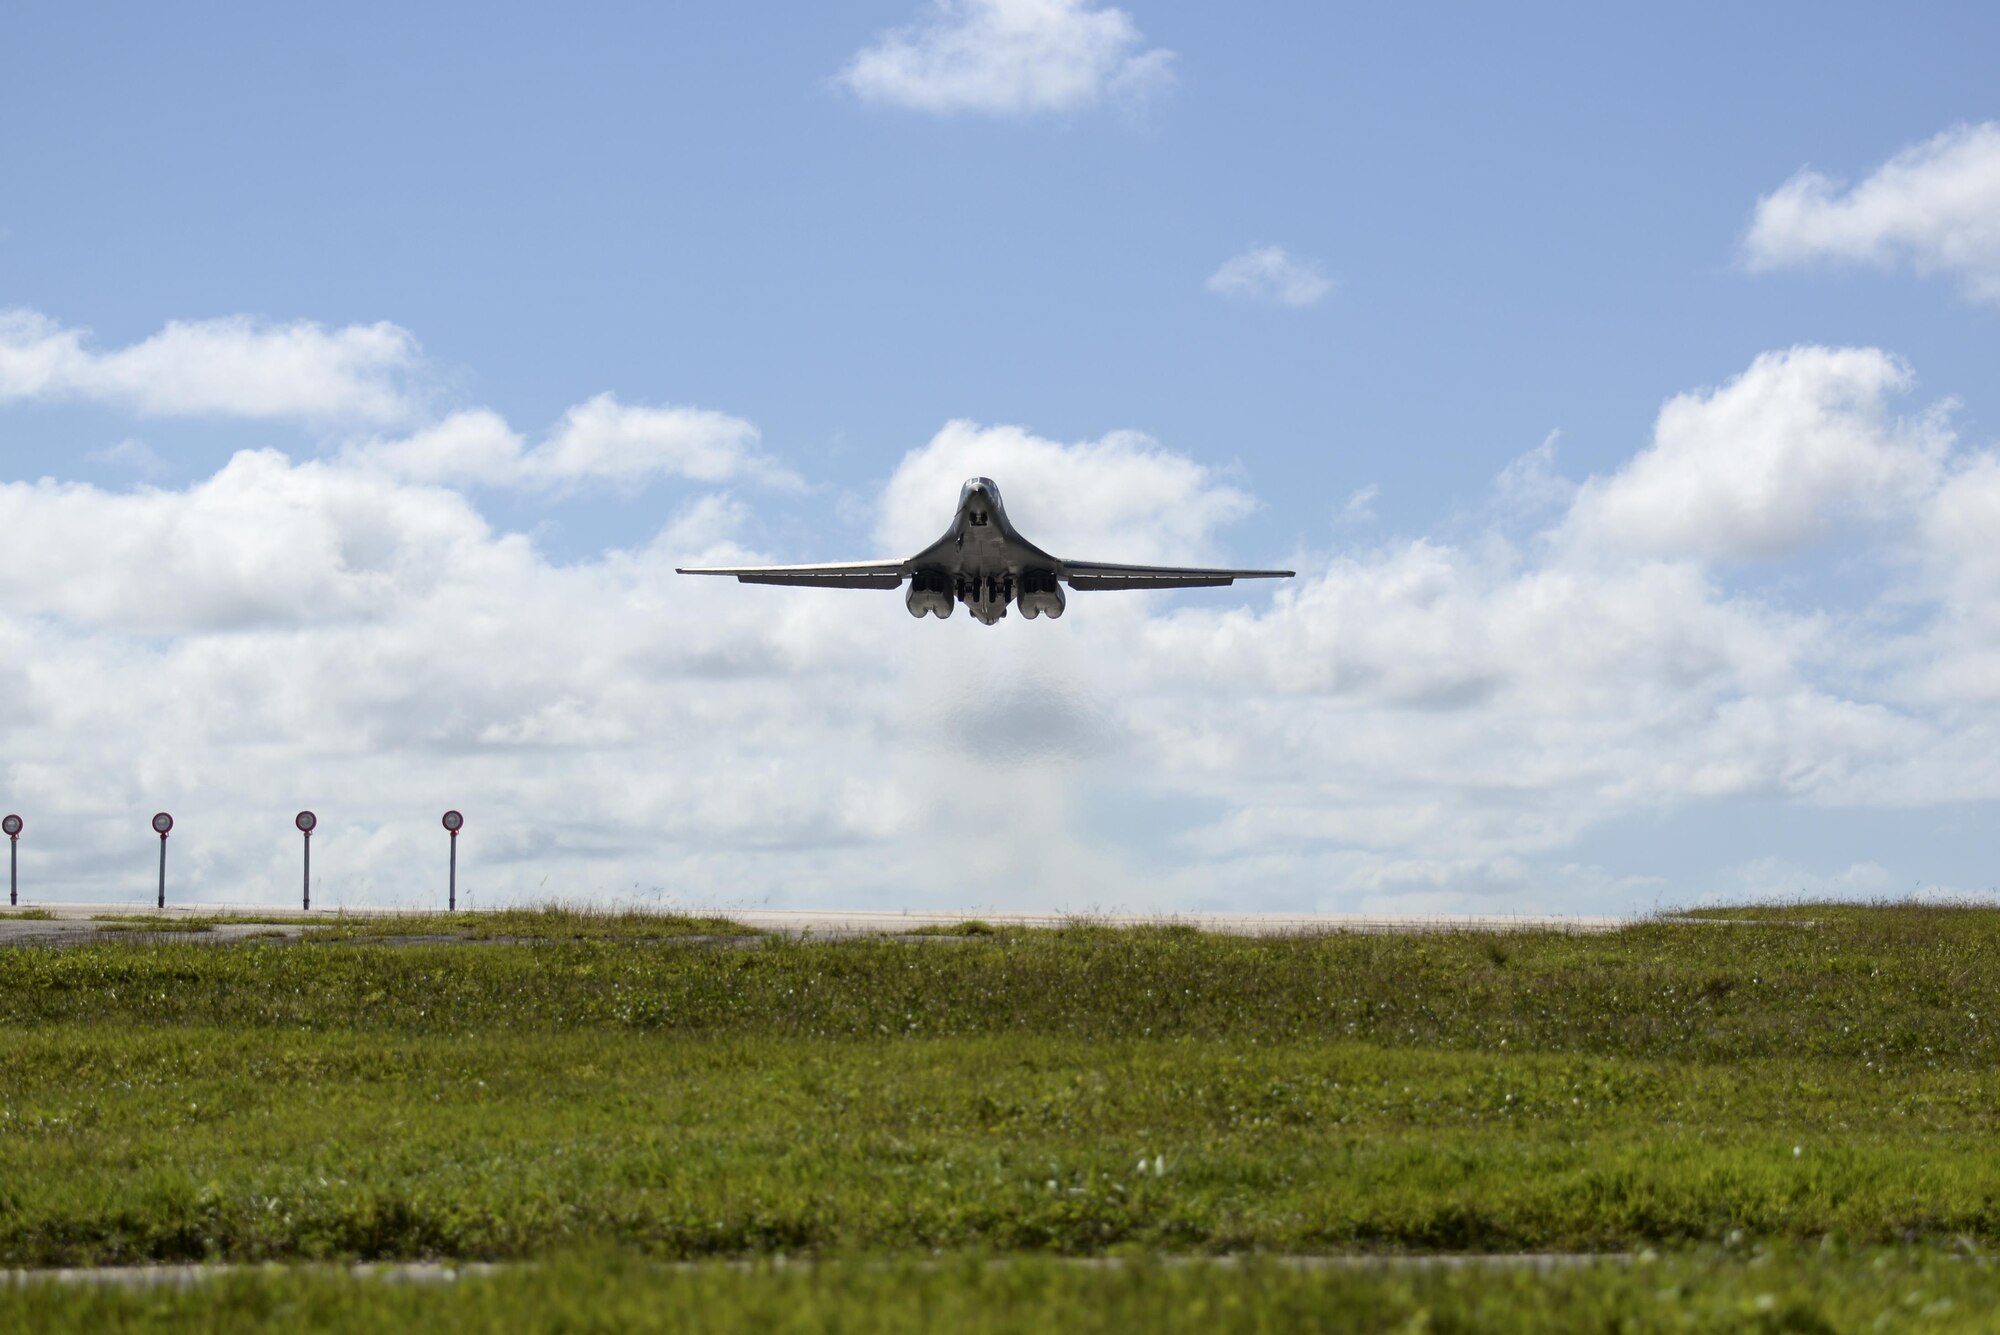 A U.S. Air Force B-1B Lancer assigned to the 37th Expeditionary Bomb Squadron, deployed from Ellsworth Air Force Base, South Dakota, takes off from Andersen AFB, Guam for a mission flying in the Western Pacific, Nov. 13, 2017